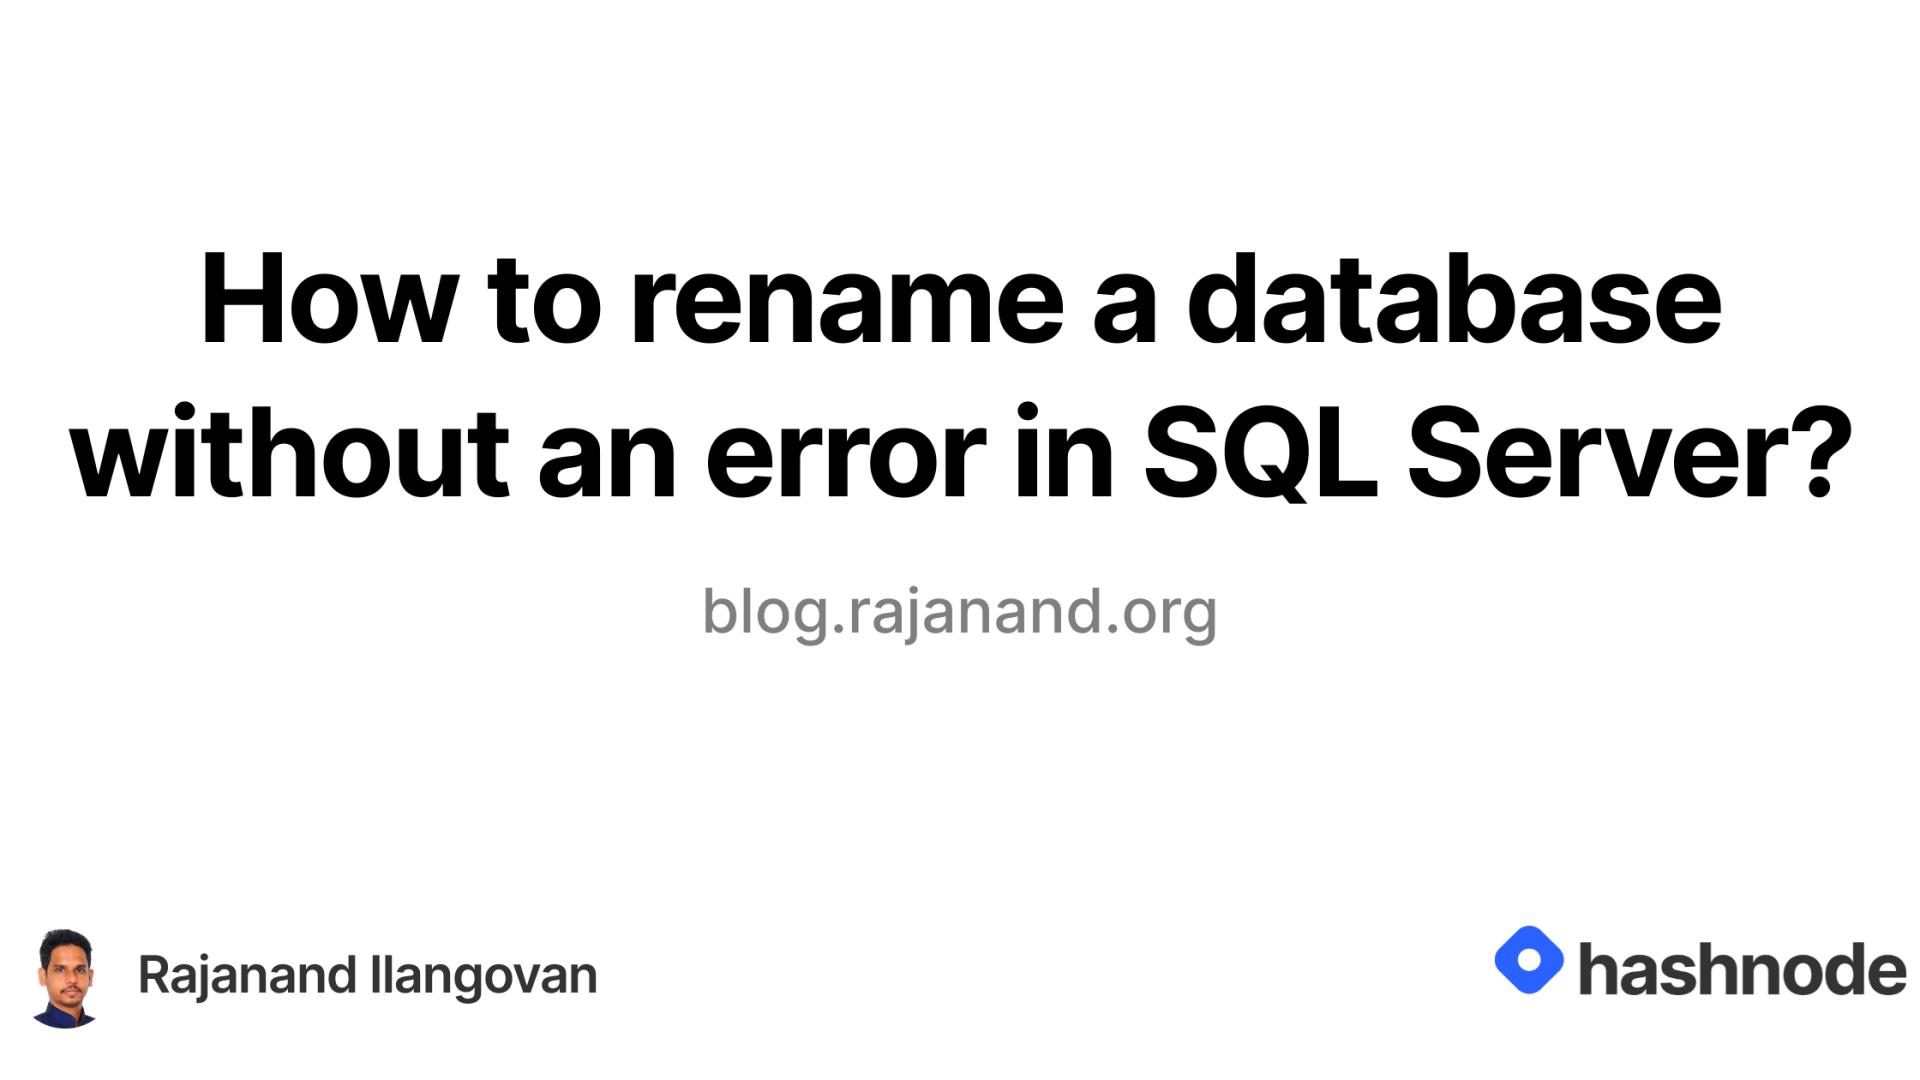 How to rename a database without an error in SQL Server?